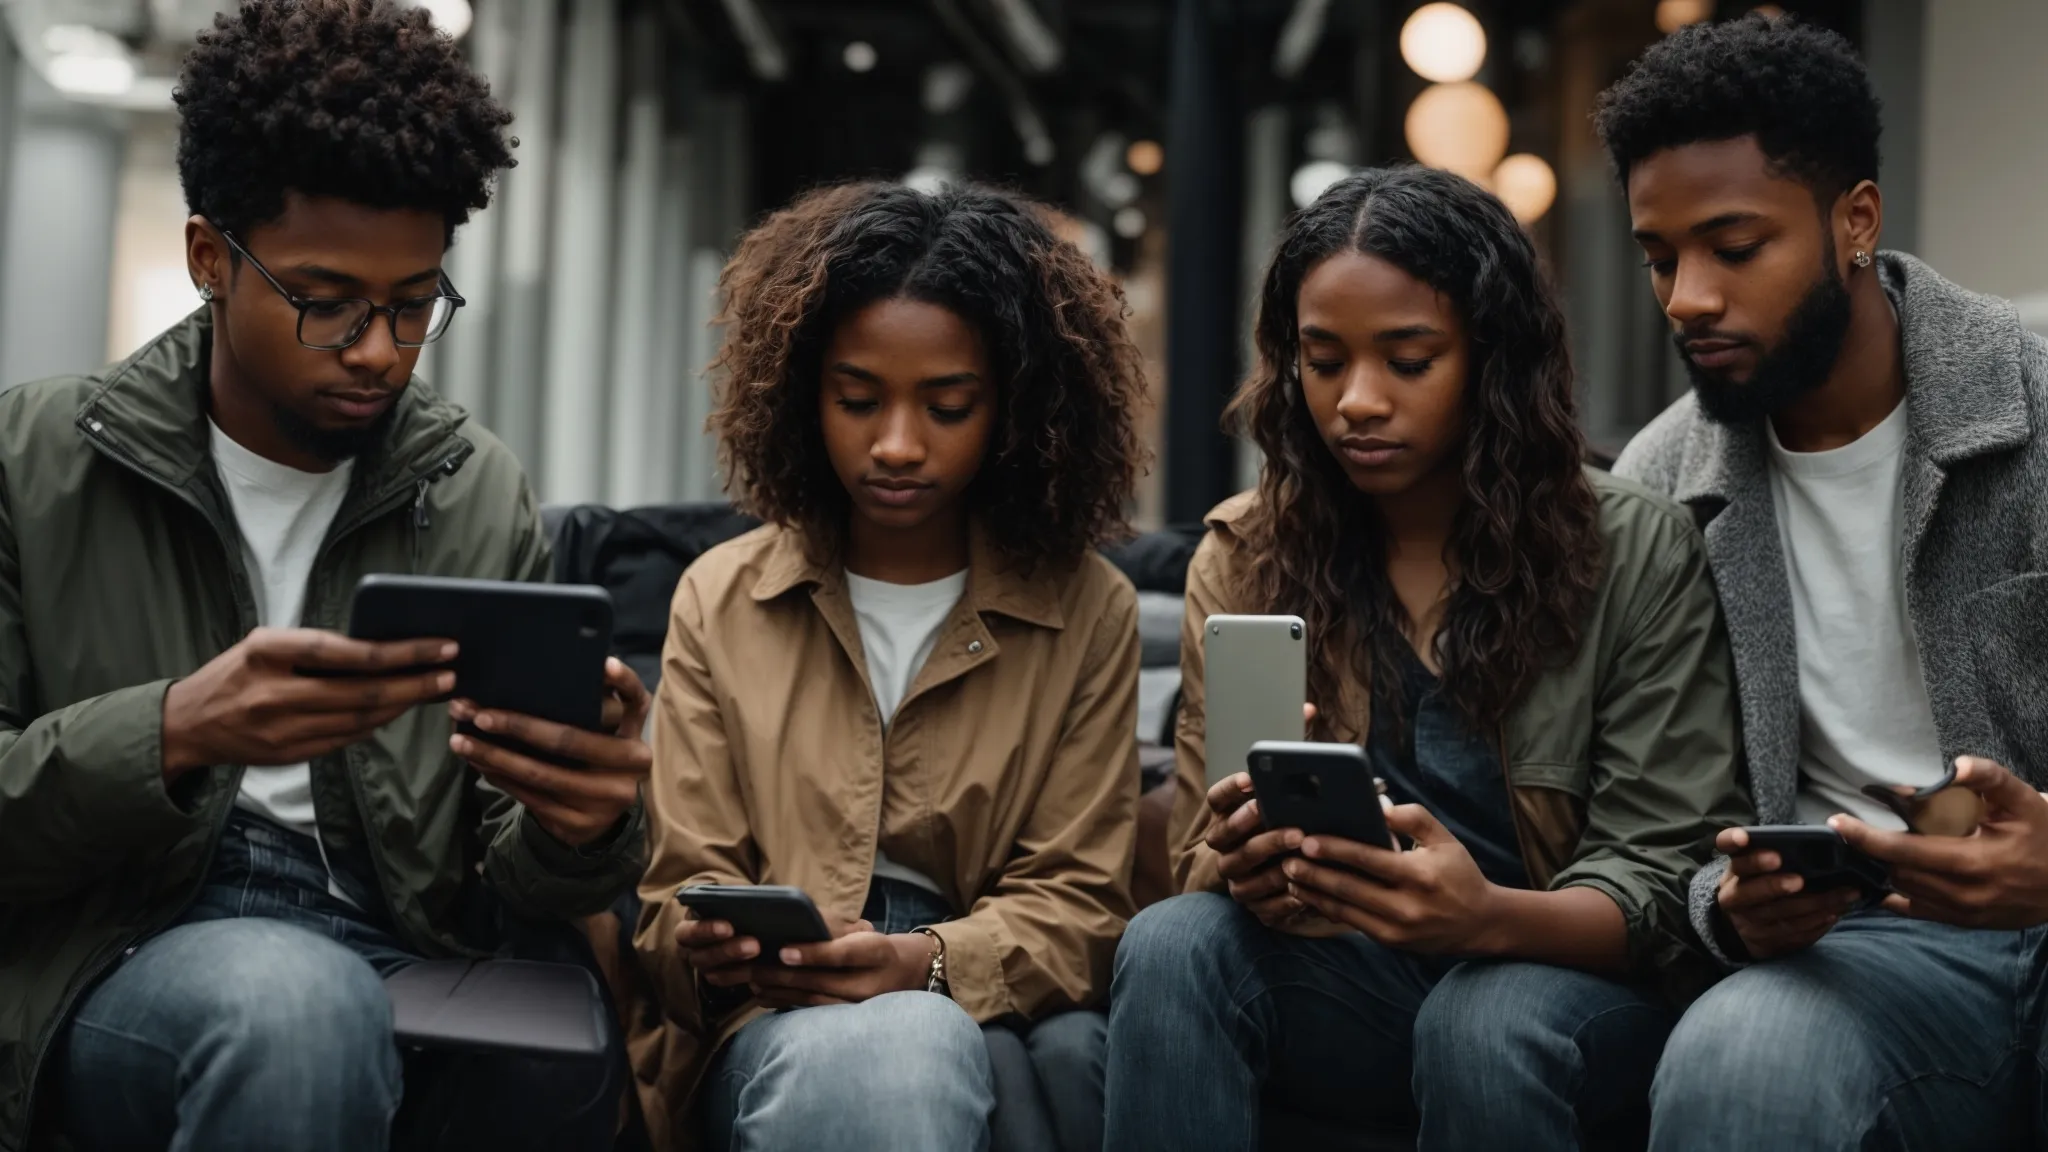 a group of diverse individuals intently focusing on their smartphones and laptops in a modern social setting, symbolizing active engagement with social media platforms.